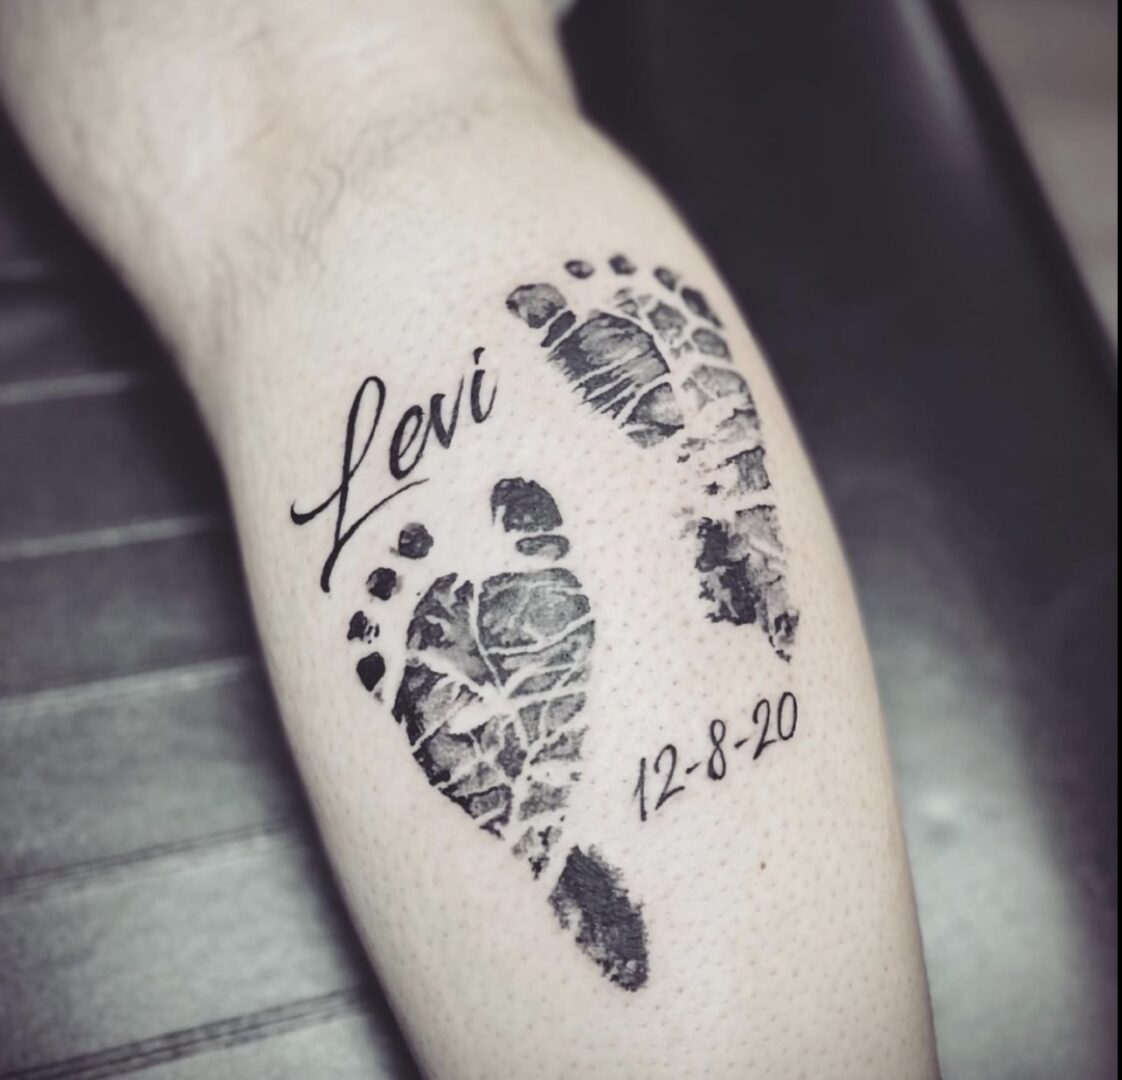 A tattoo of two feet with the name levi and date.